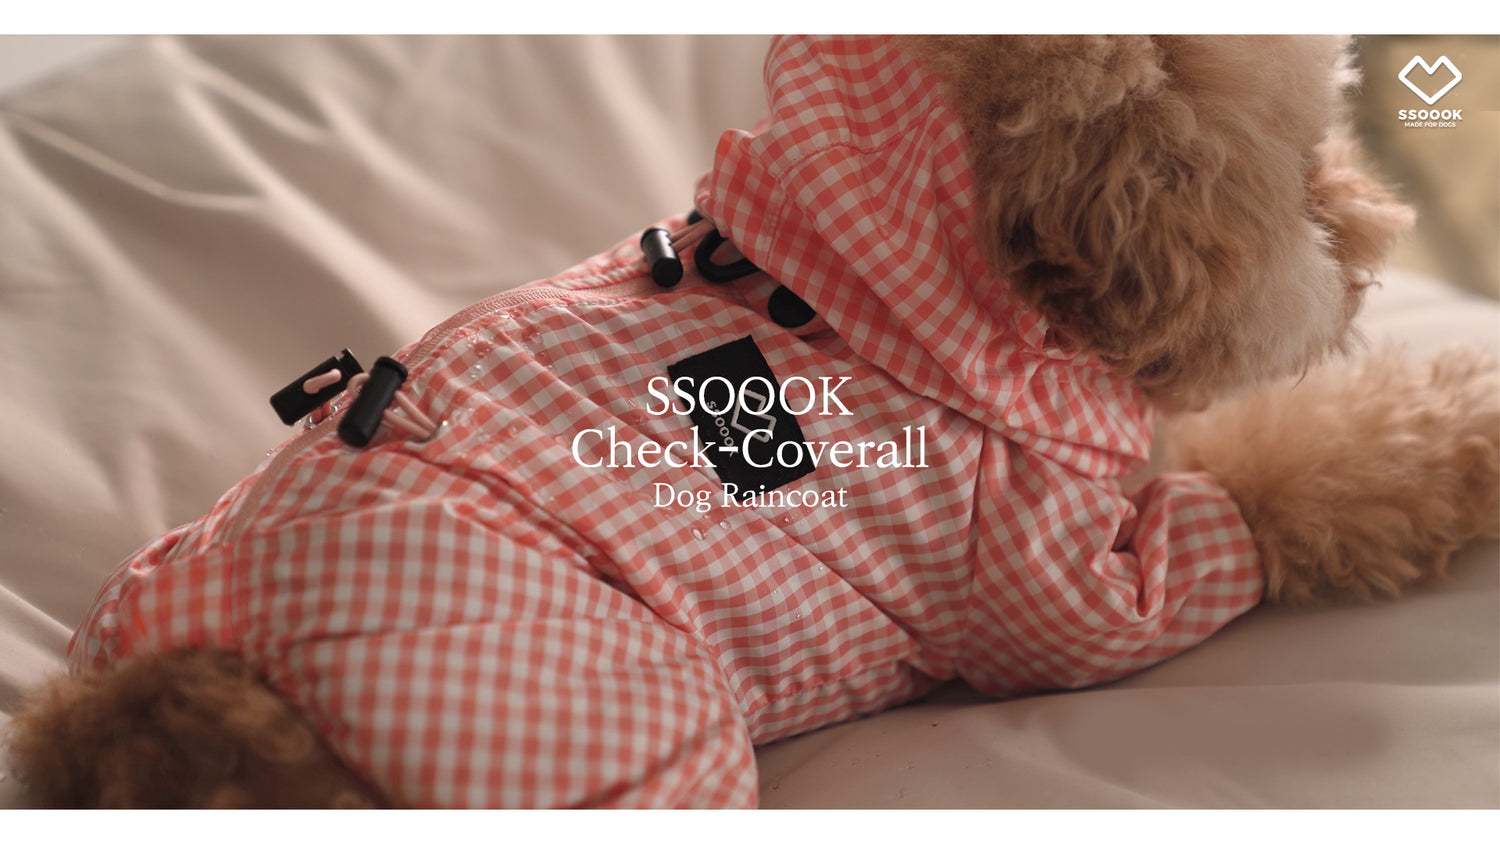 SSOOOK Check Air Coverall